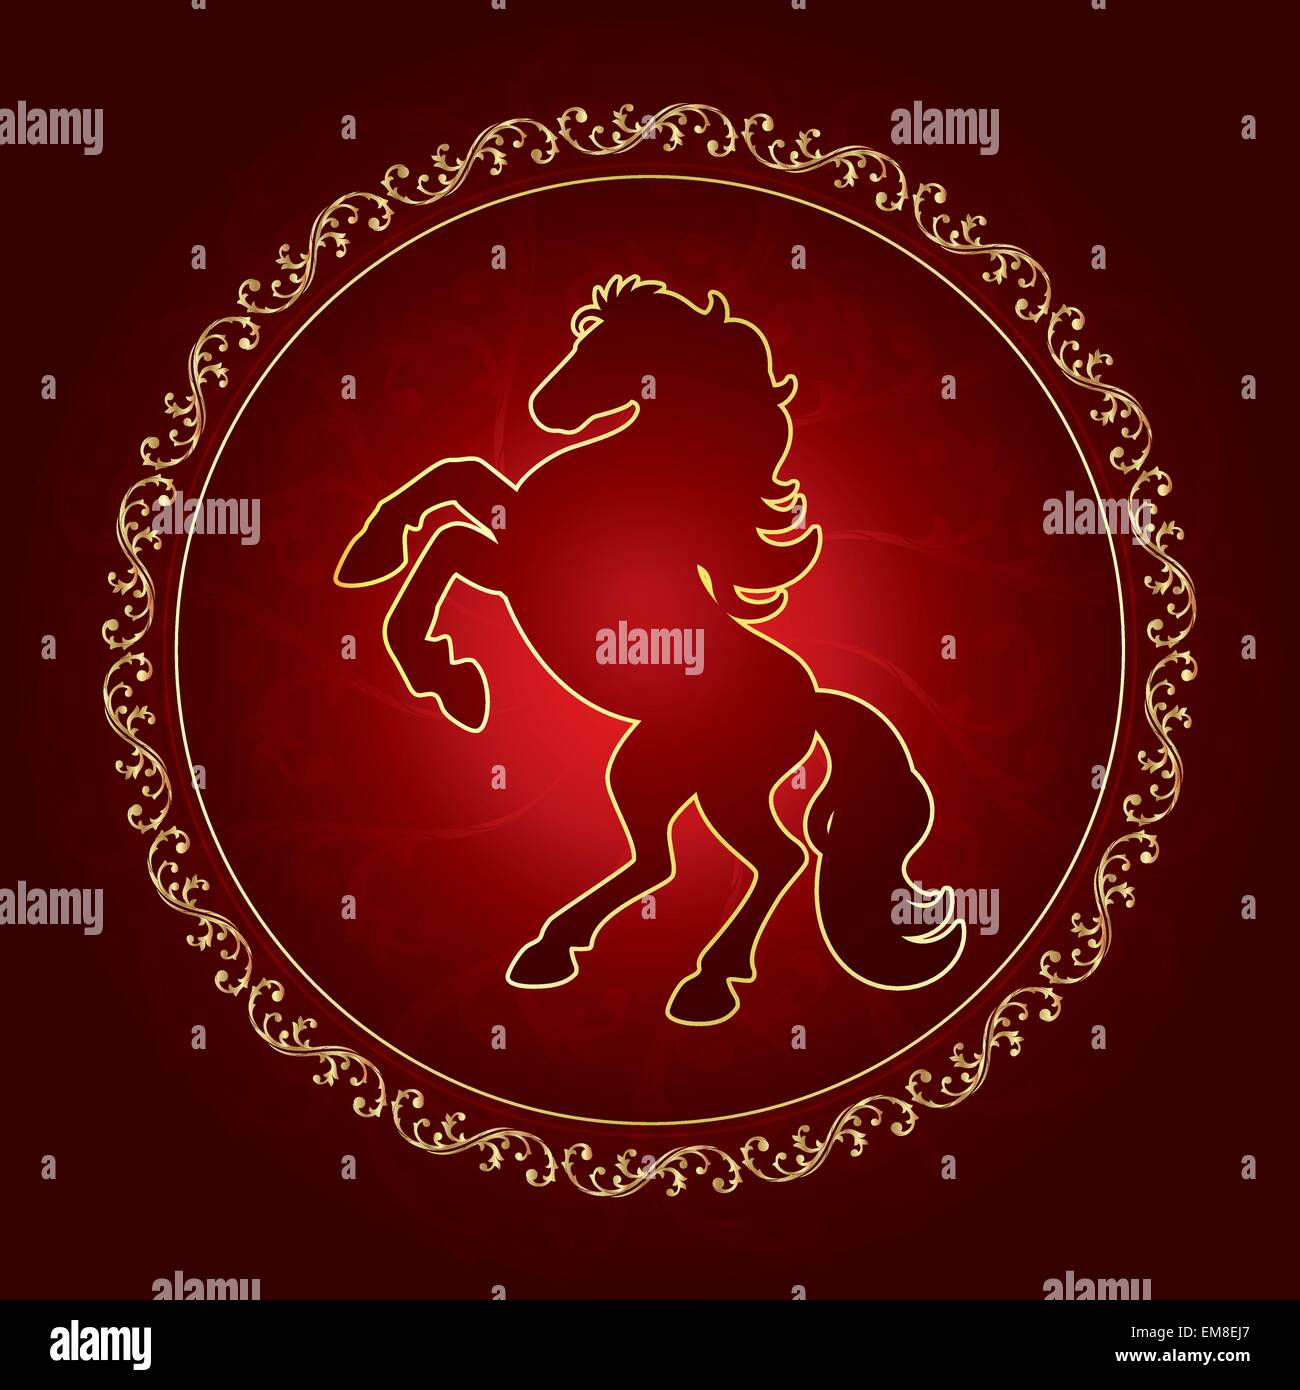 Horse silhouette on vintage floral background Stock Vector